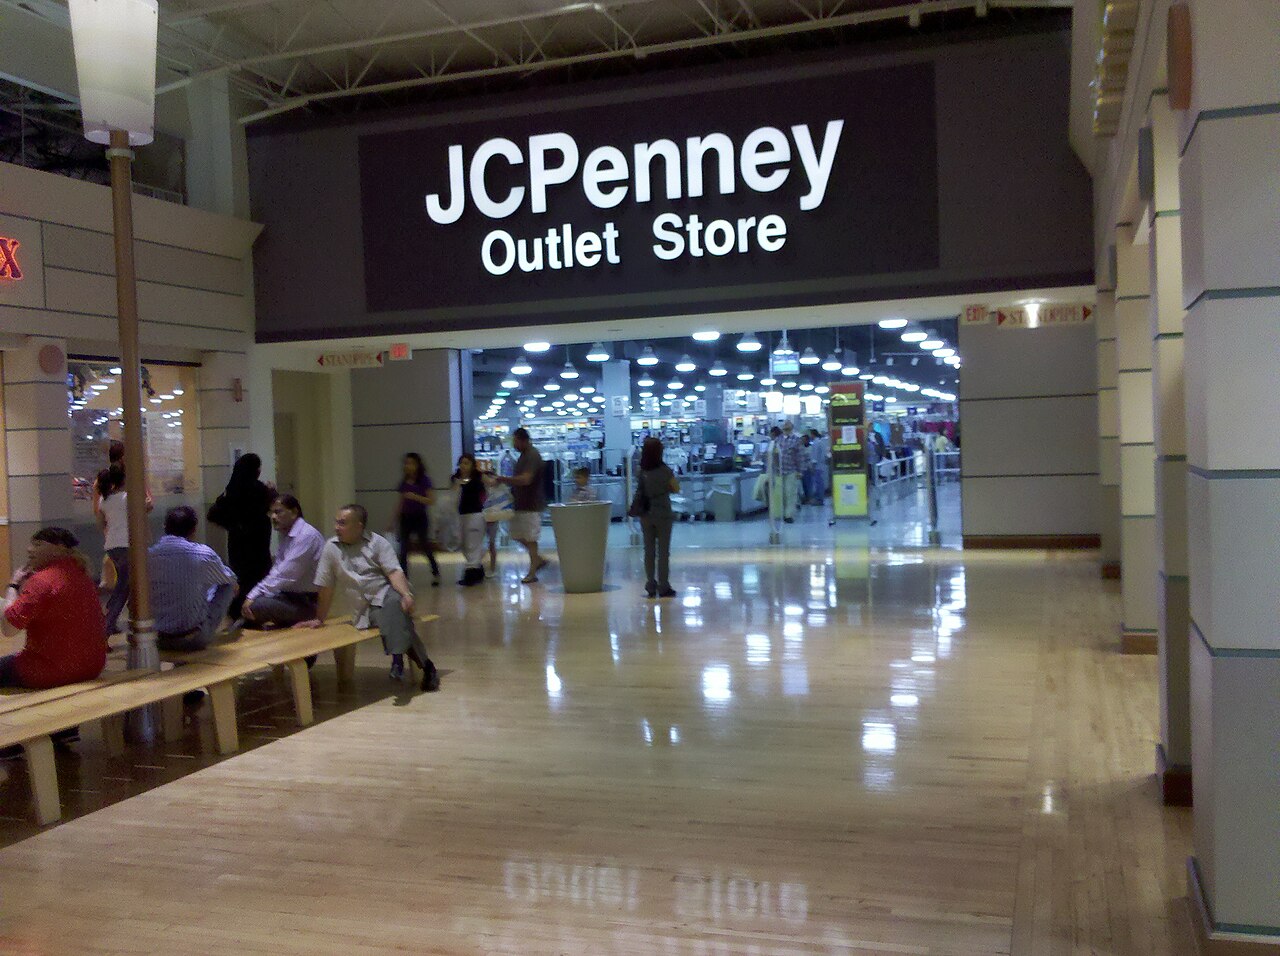 File Potomac Mills JCPenney Outlet mall entrance jpg Wikimedia Commons